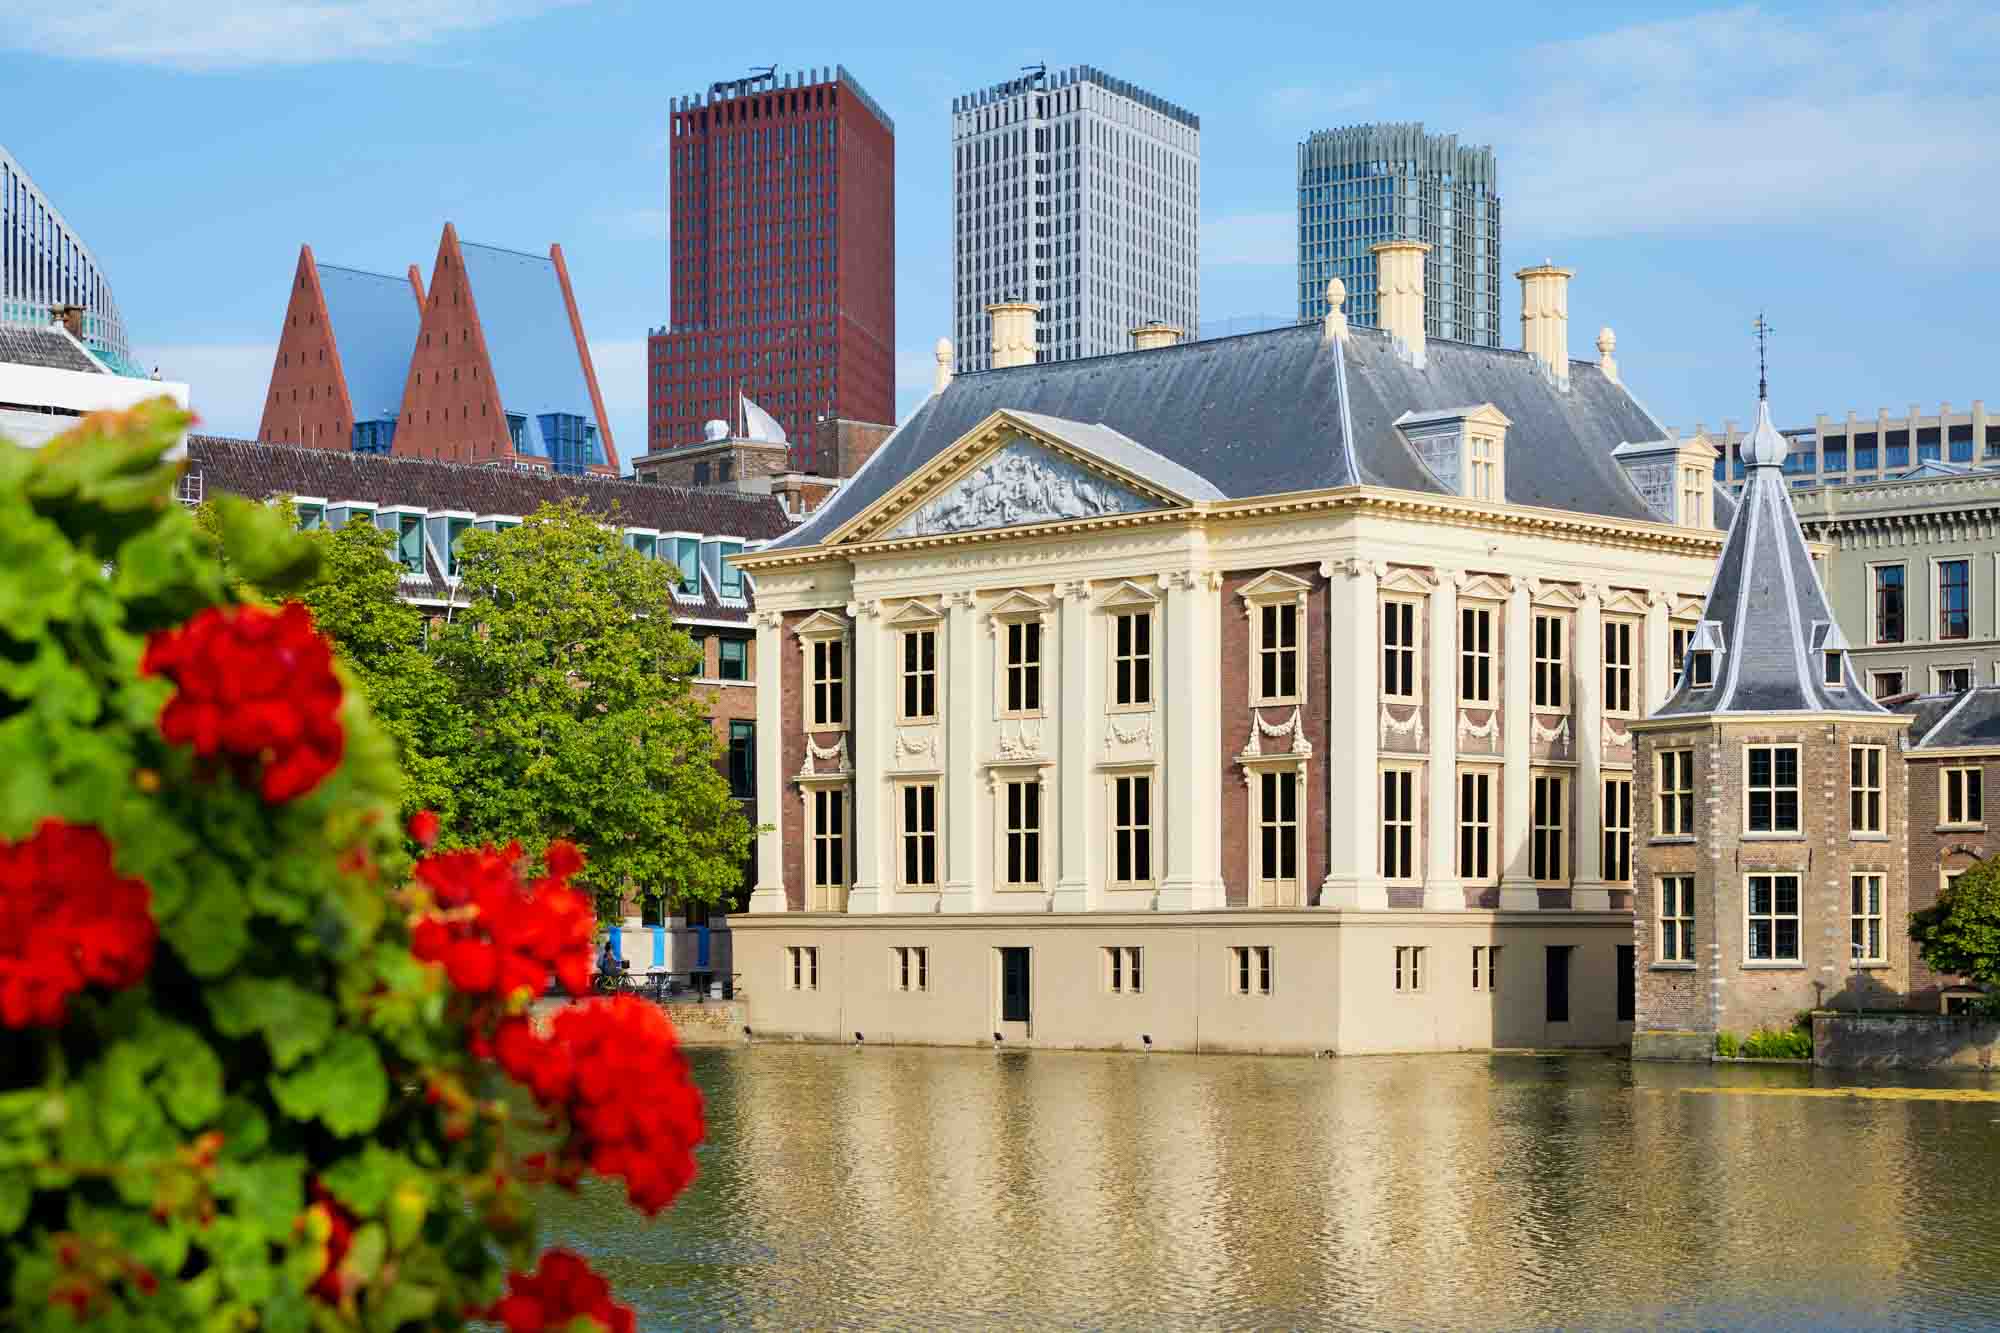 Checking out the Mauritshuis Museum is one of the best things to do in the Hague